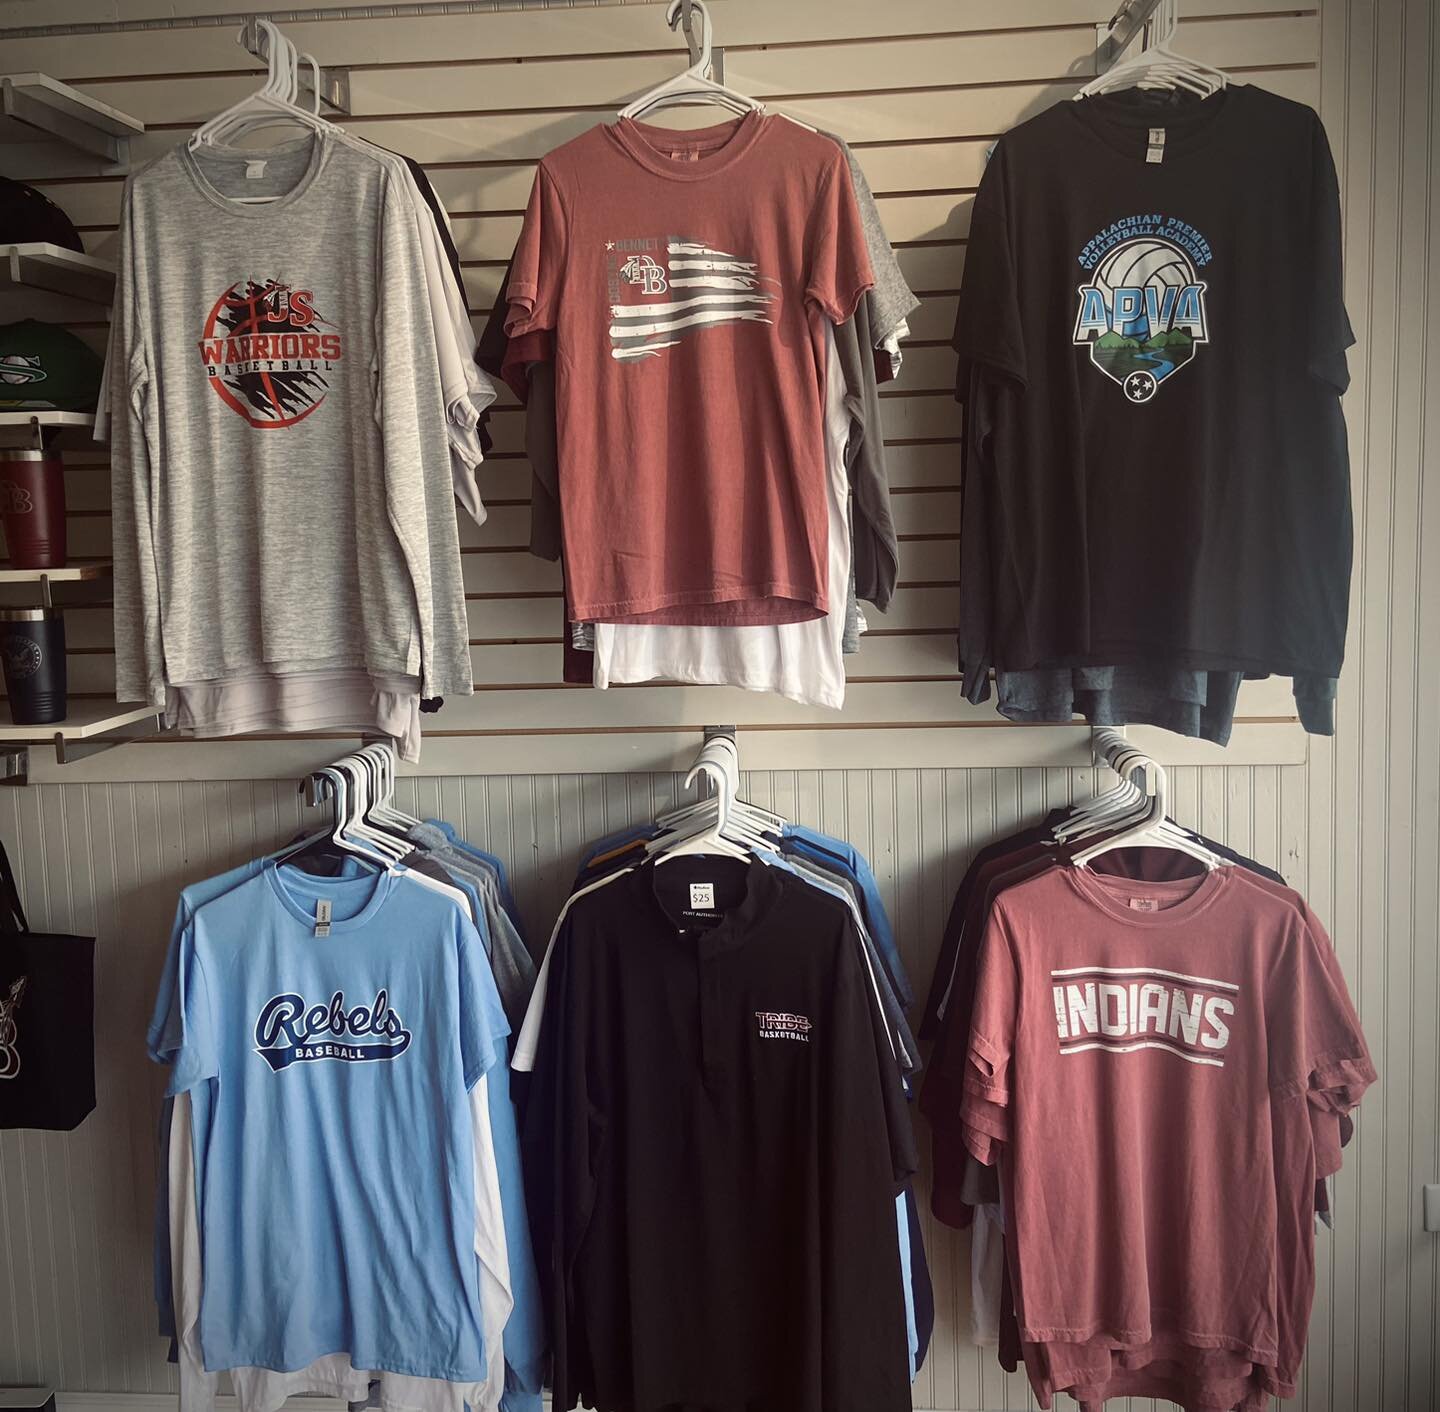 💥We have added more to our clearance wall!💥
All apparel in this section is ONLY $10!! What a deal?!! Hurry while we still have a great selection left! Spread the word 📢